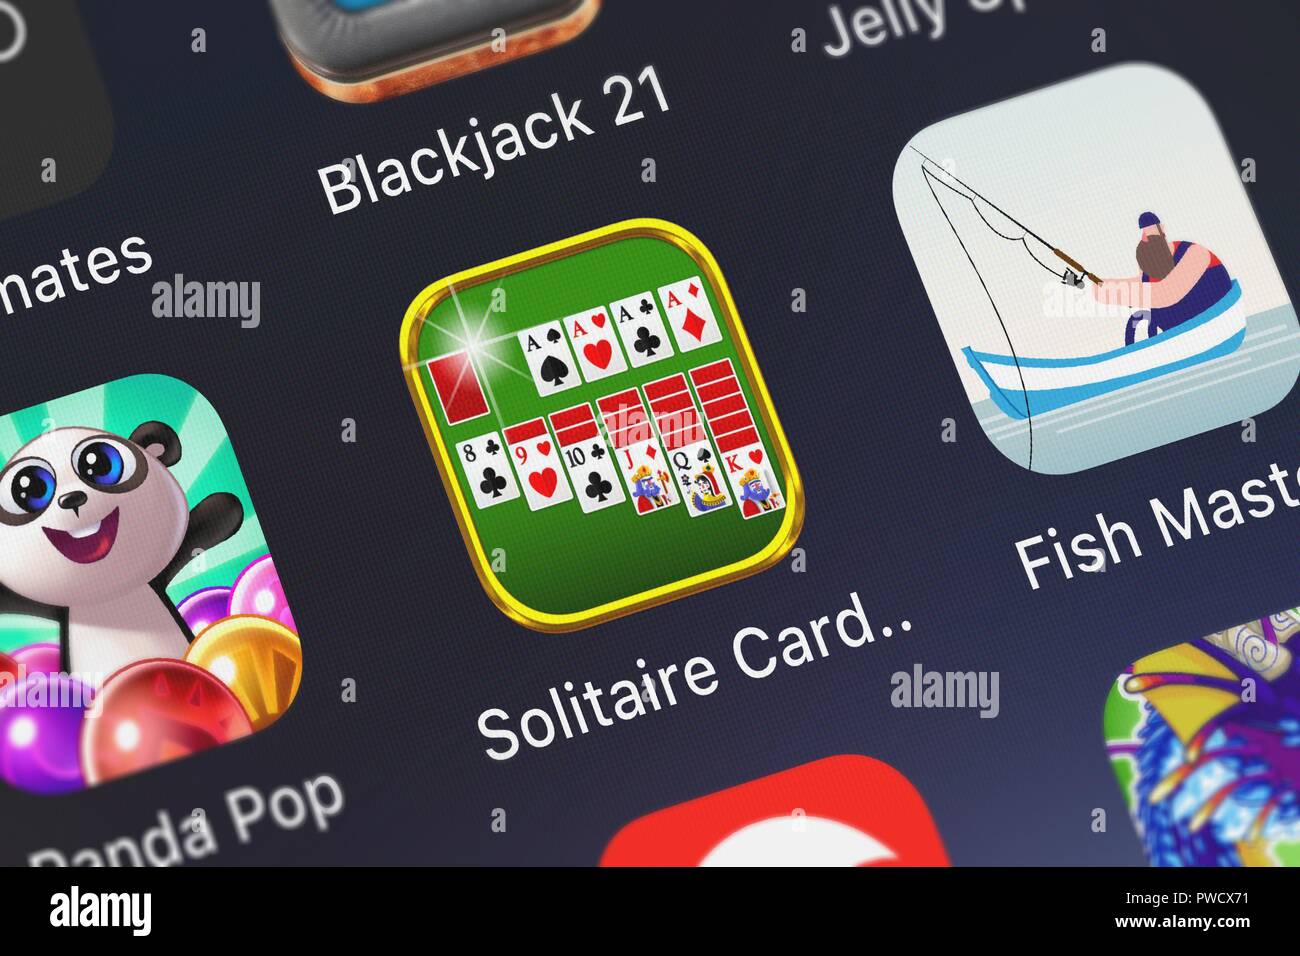 London, United Kingdom - October 15, 2018: Screenshot of Fiogonia Games's mobile app Solitaire Card Game Classic. Stock Photo